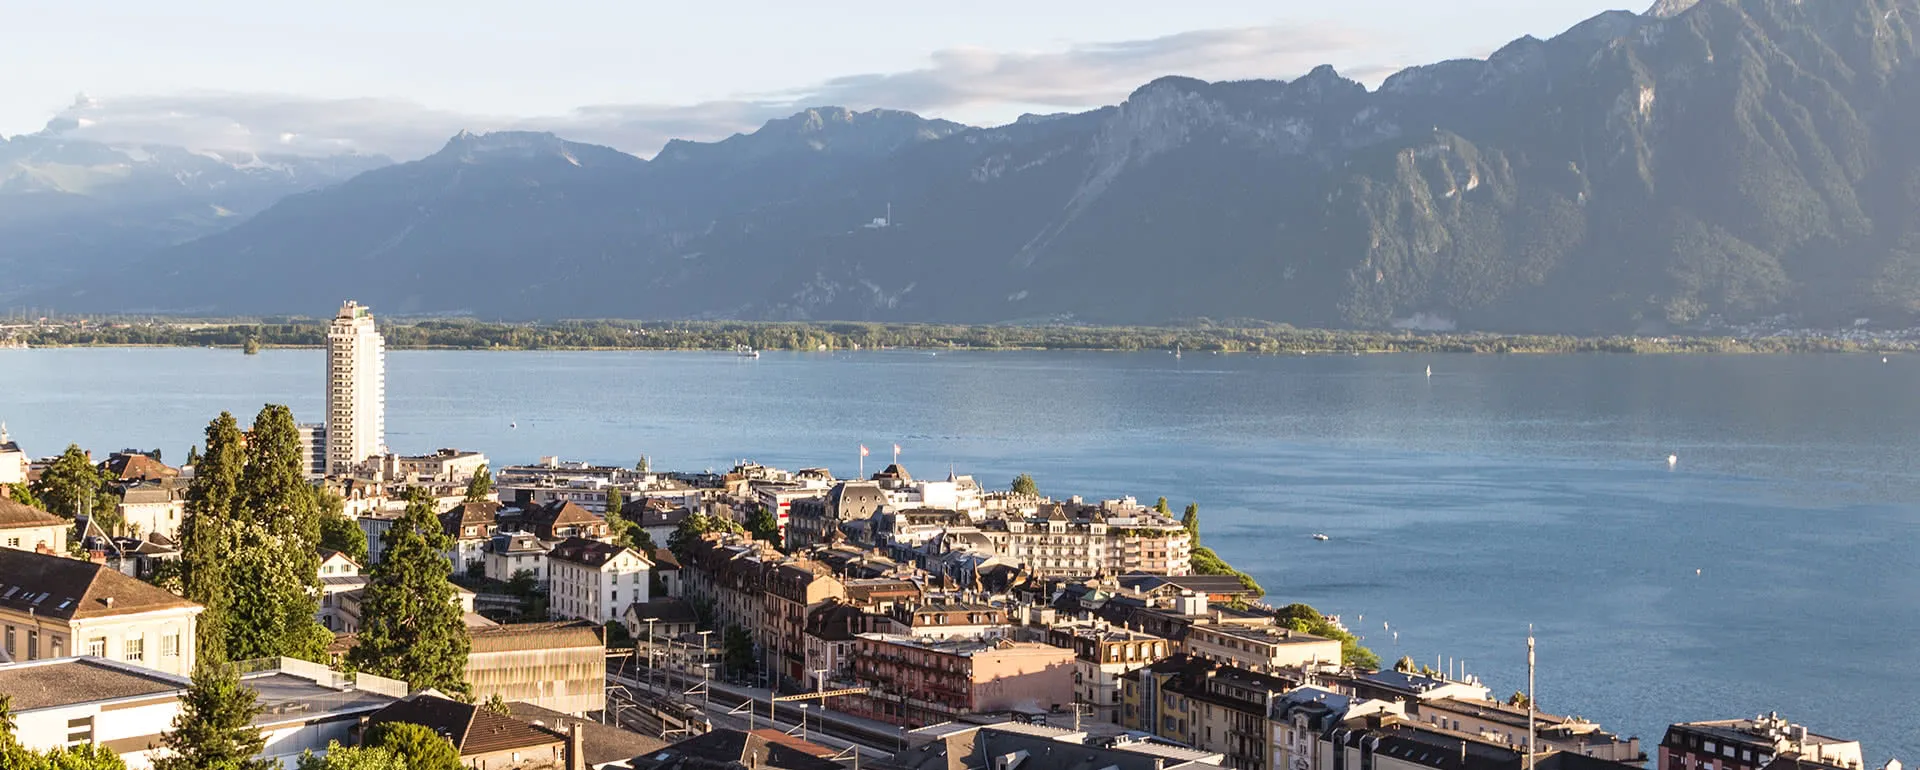 Montreux - the destination with youth hostels